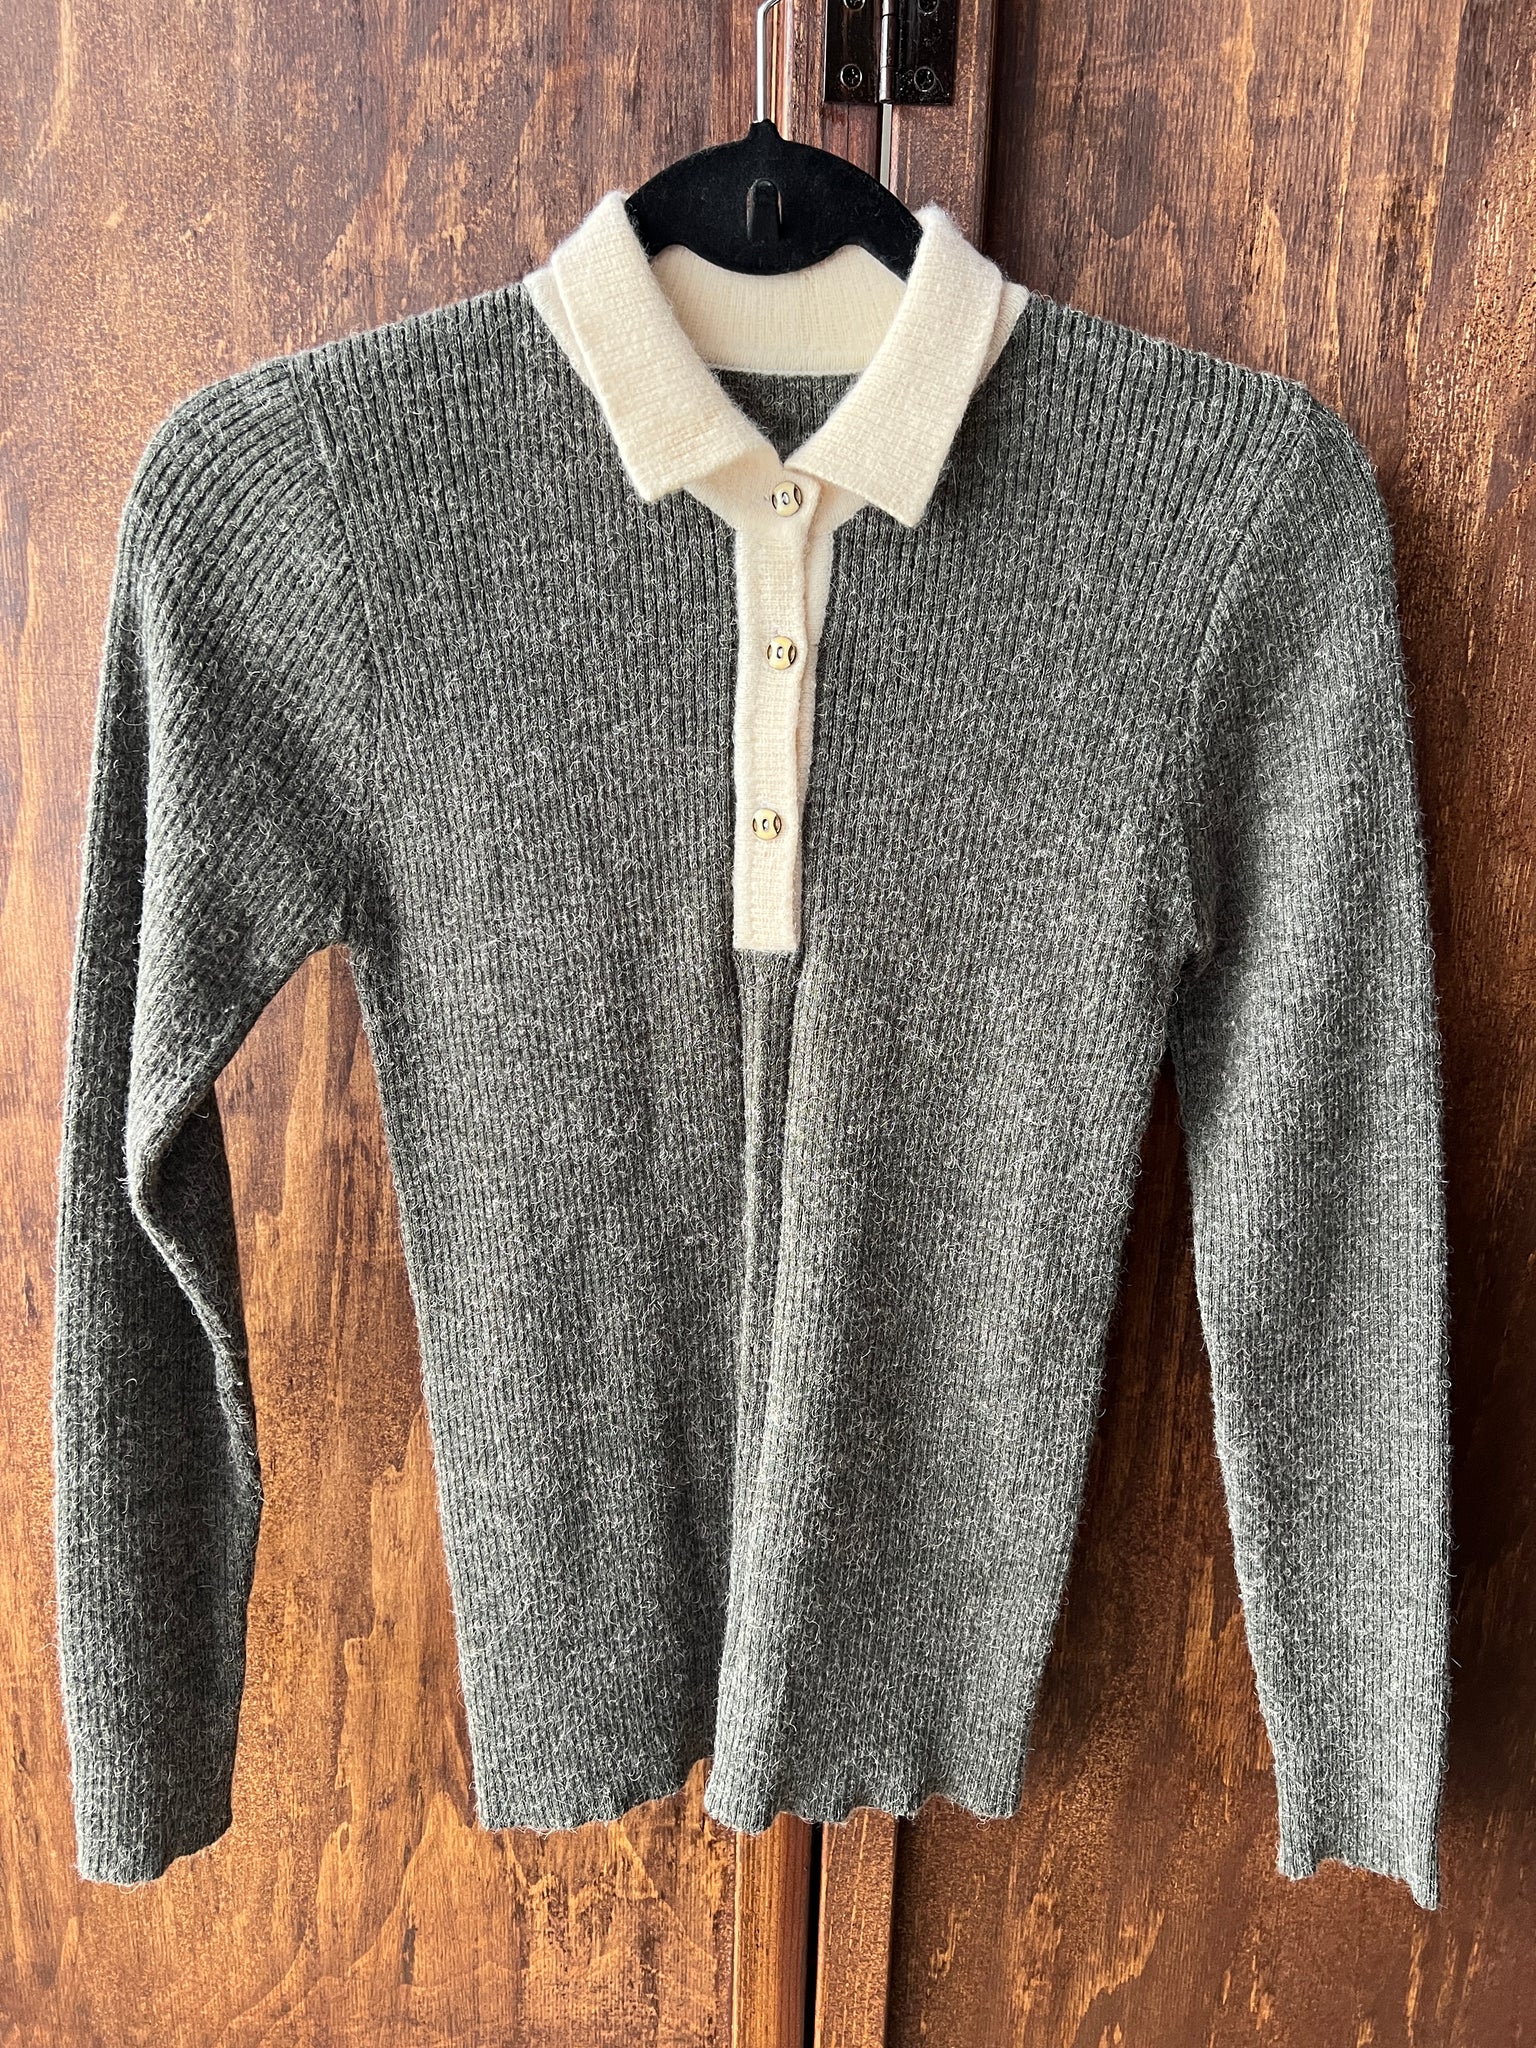 1990s SWEATER- olive w/ cream collar/ buttons